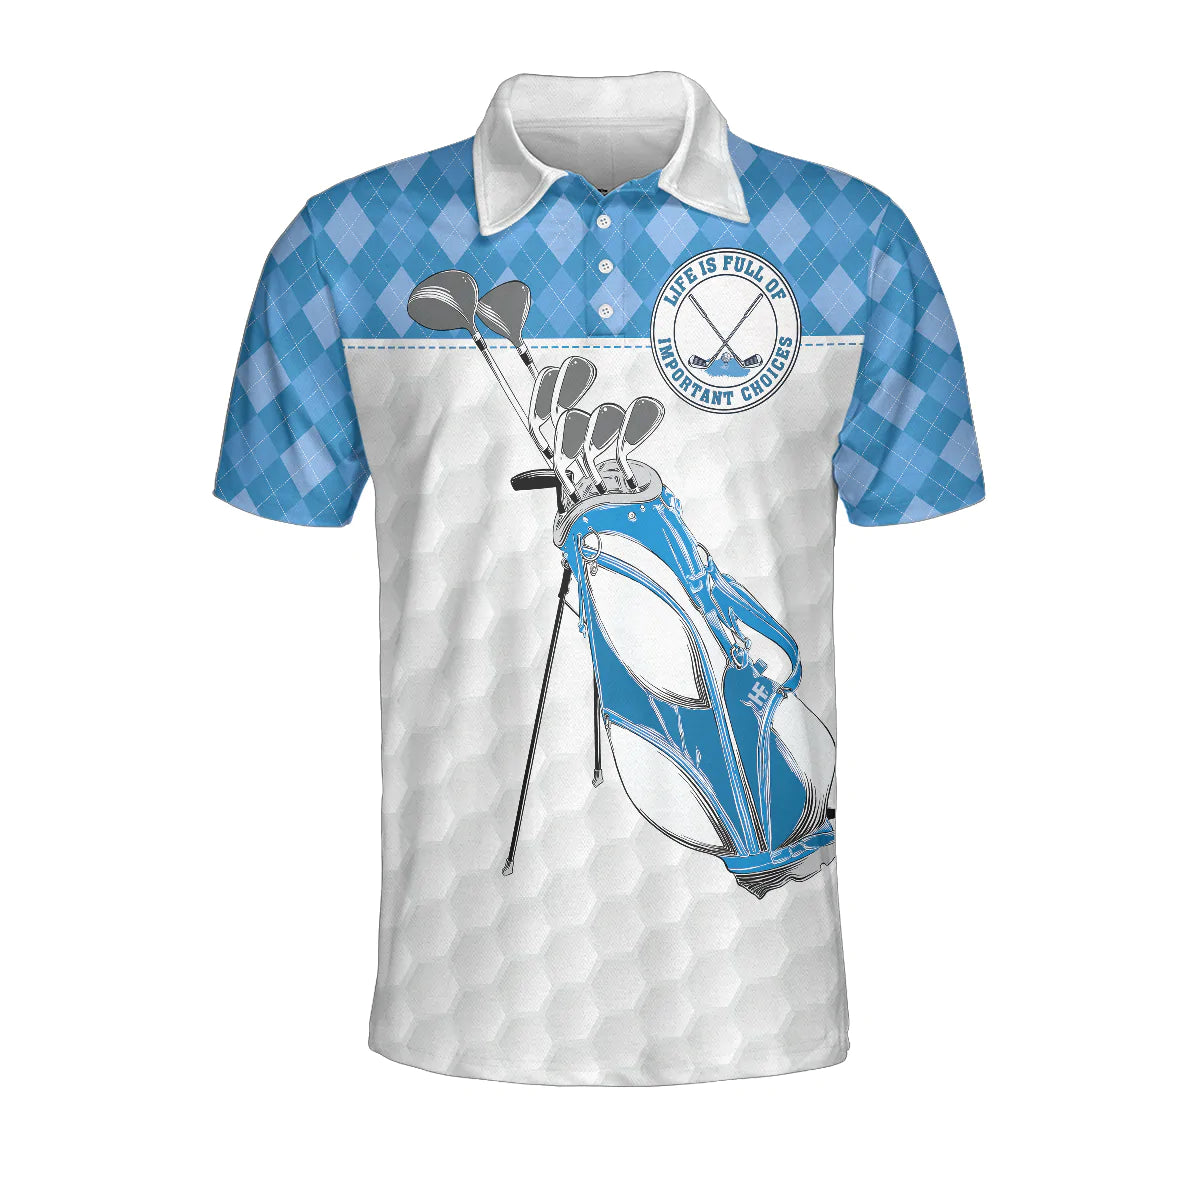 Men’s Polo Shirt with Blue Argyle Pattern and White Golf Texture, Featuring the Message “Life is Full of Important Choices” for Golfers – GP360